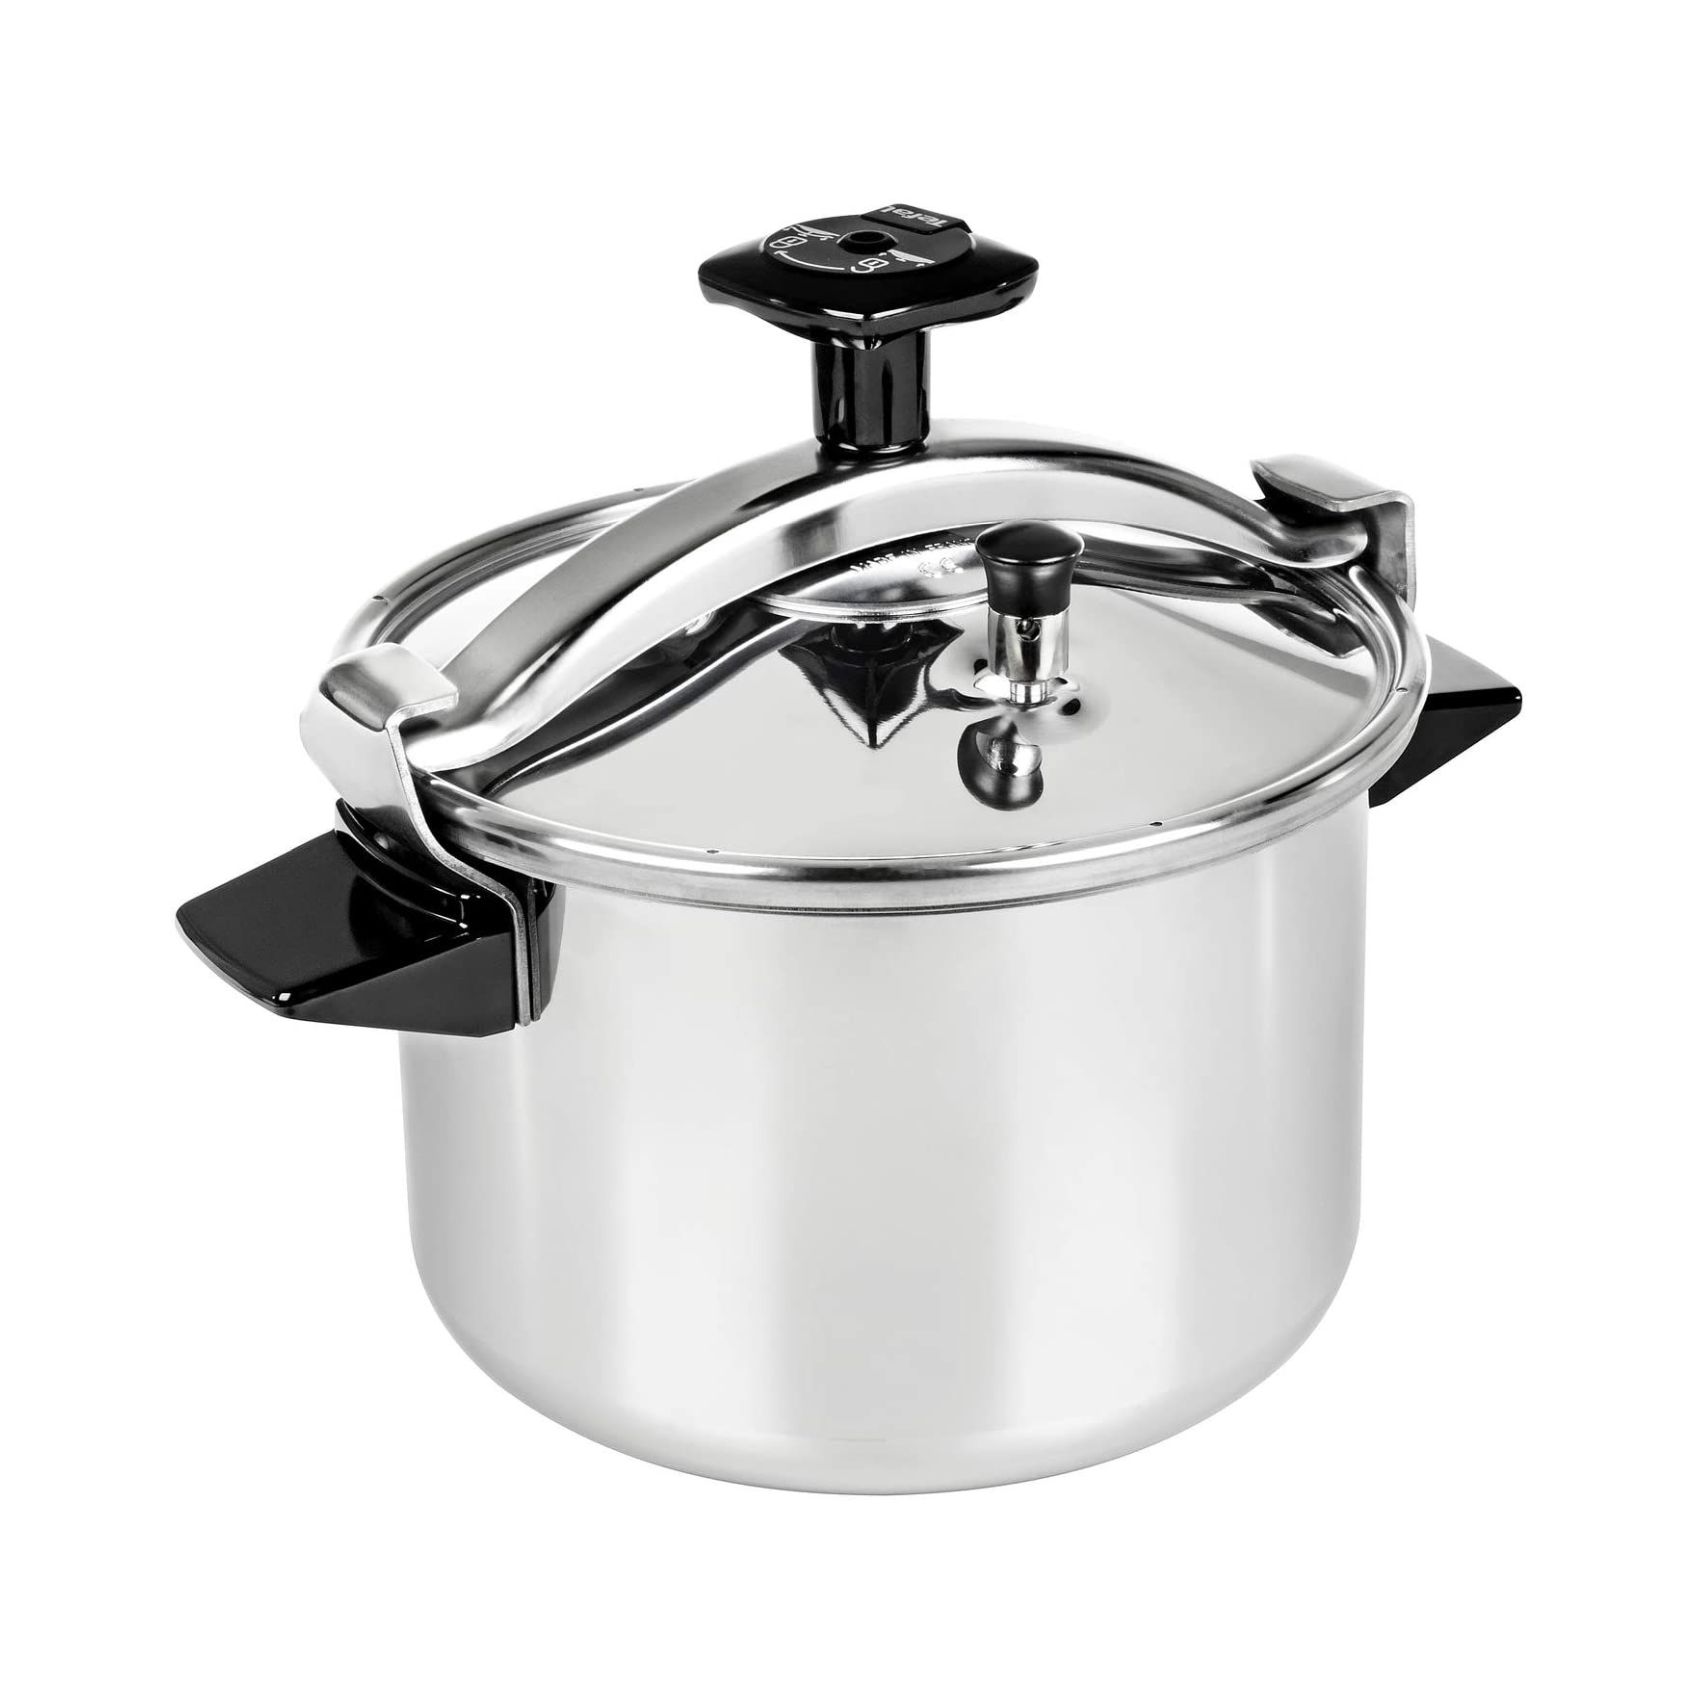 Tefal Authentic Stainless Steel Pressure Cooker Silver 10L